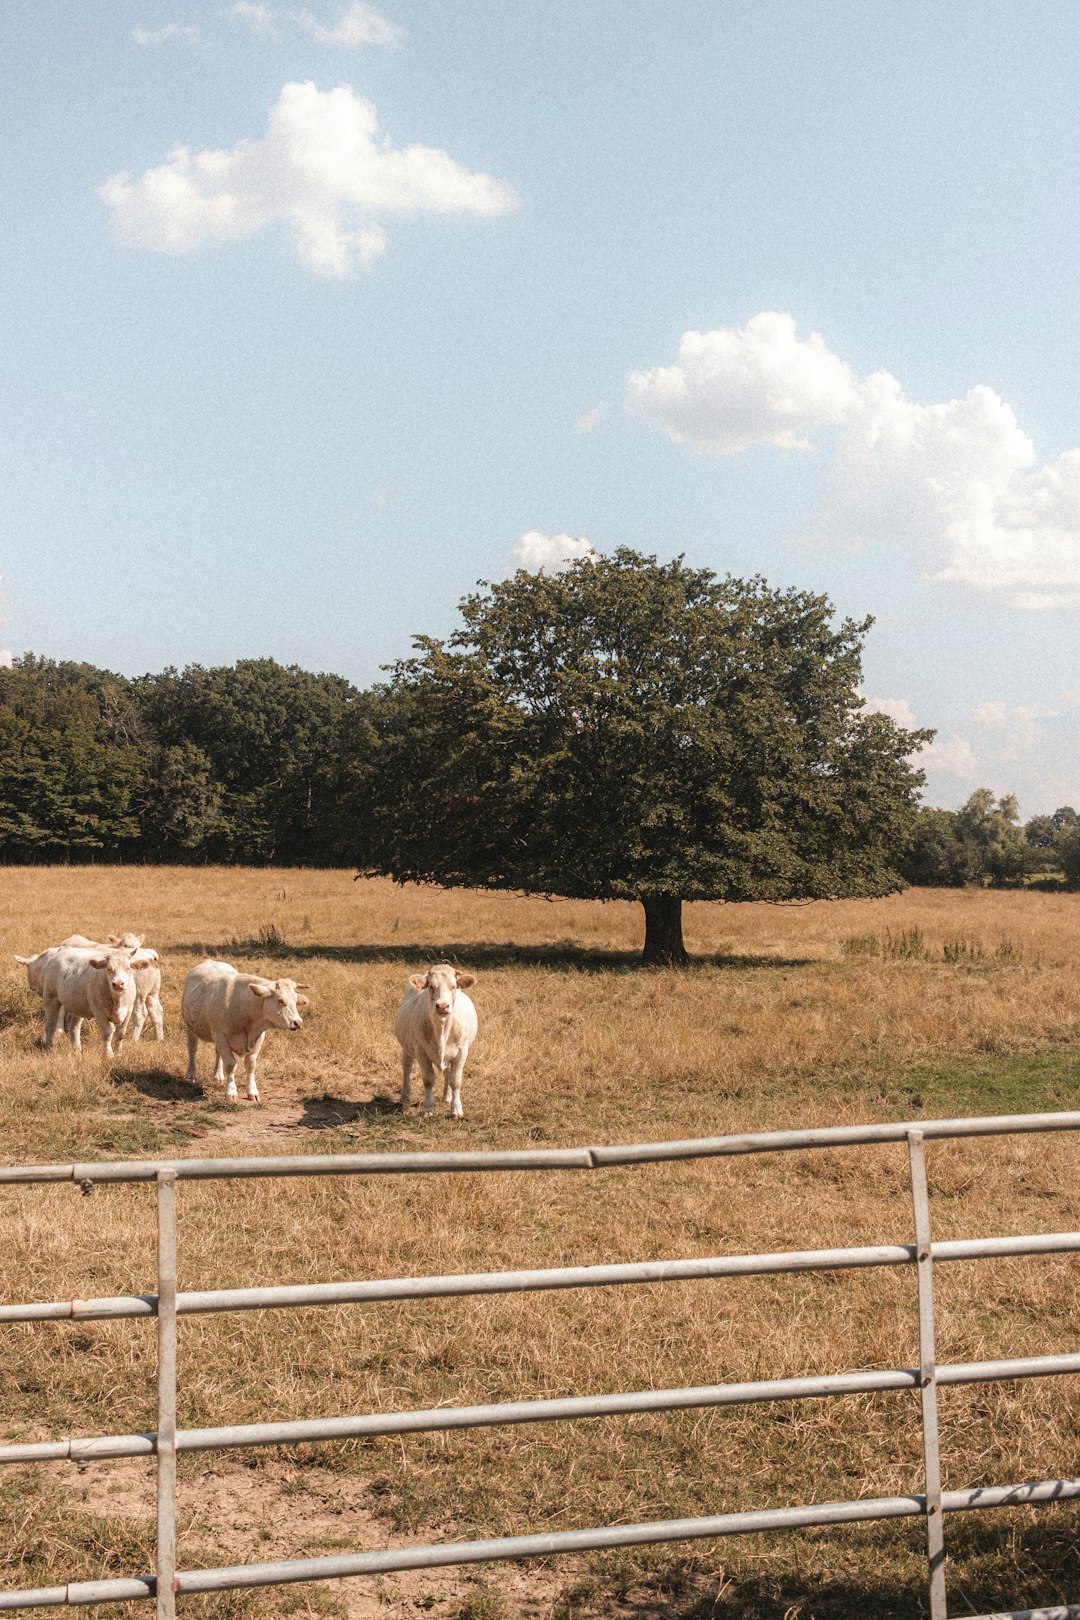 herd of white sheep on green grass field during daytime